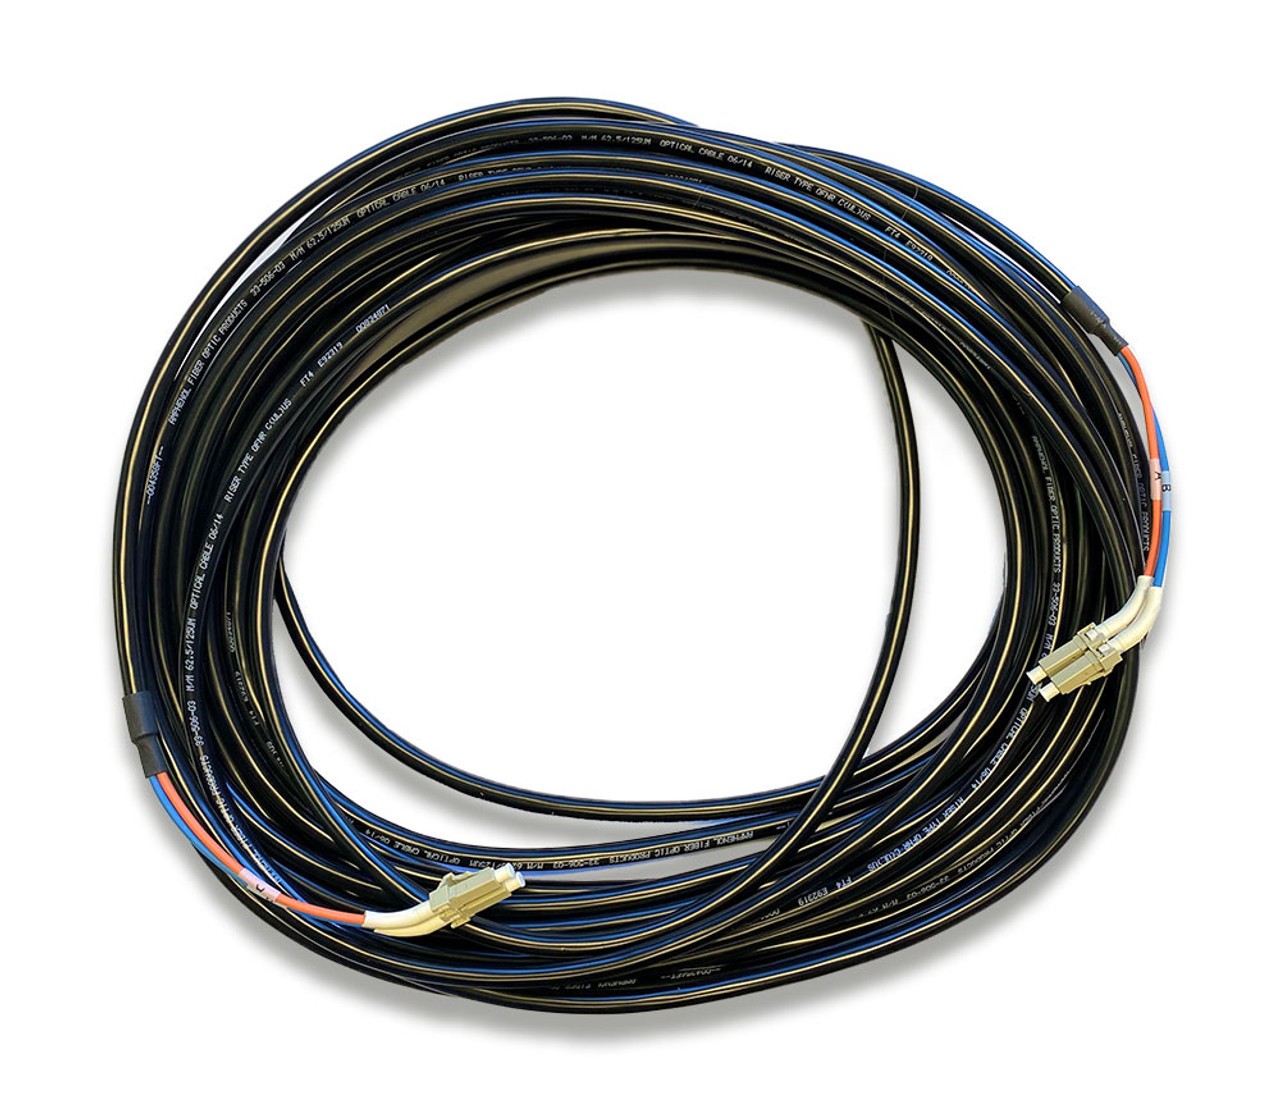 2 Fiber LC-LC Multimode 62.5 Indoor / Outdoor Patch Cable 15M *Clearance*